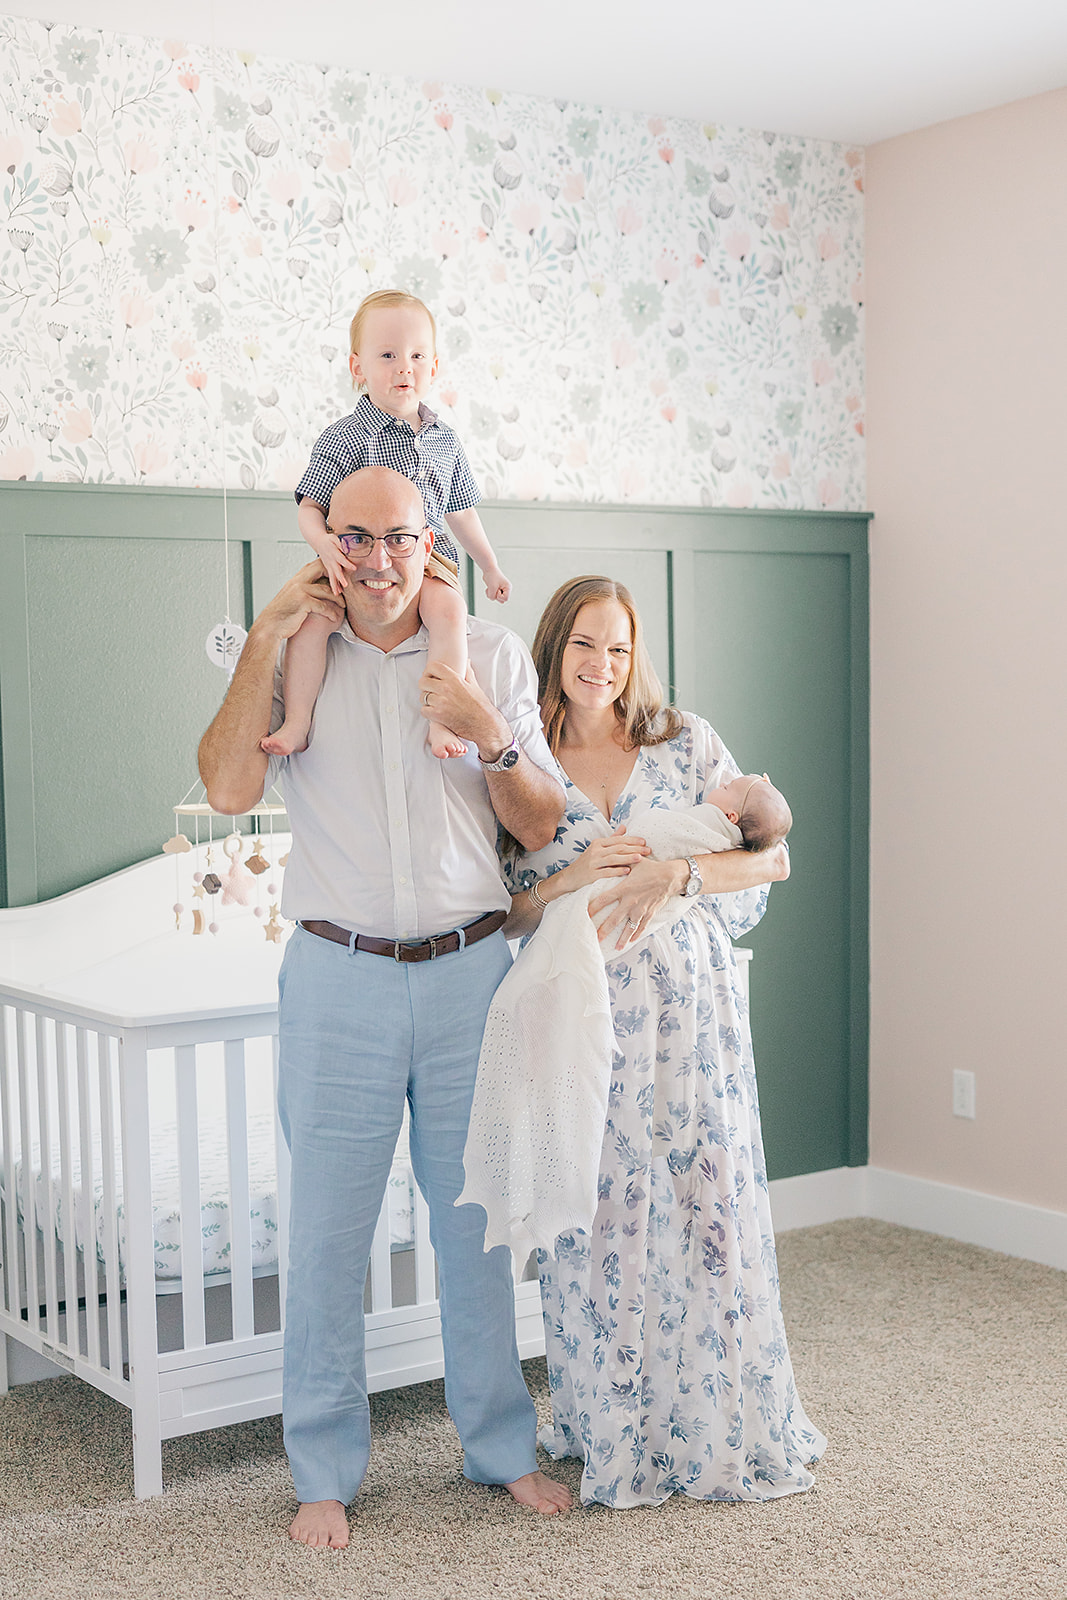 family with newborn baby girl in nursery with floral wallpaper